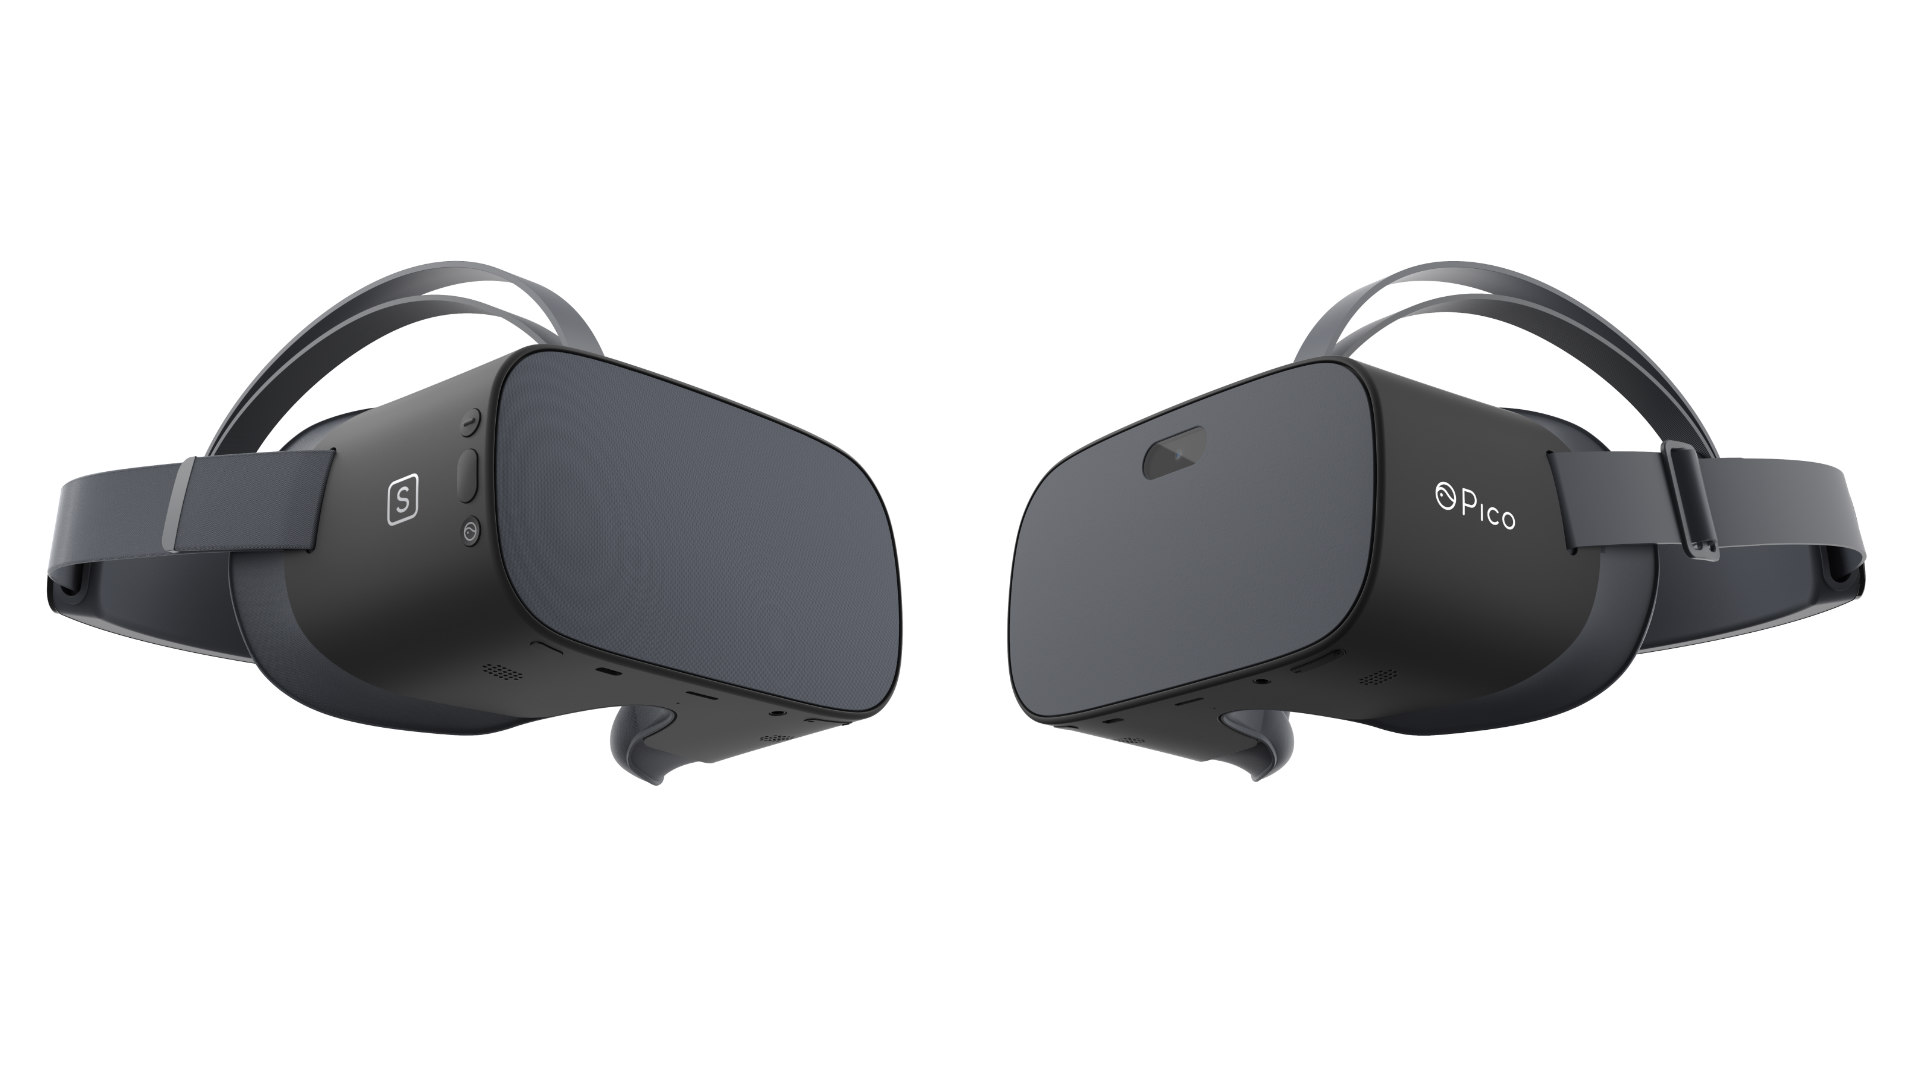 Pico Announces 2 New Versions of Its Latest 3DOF VR Headset